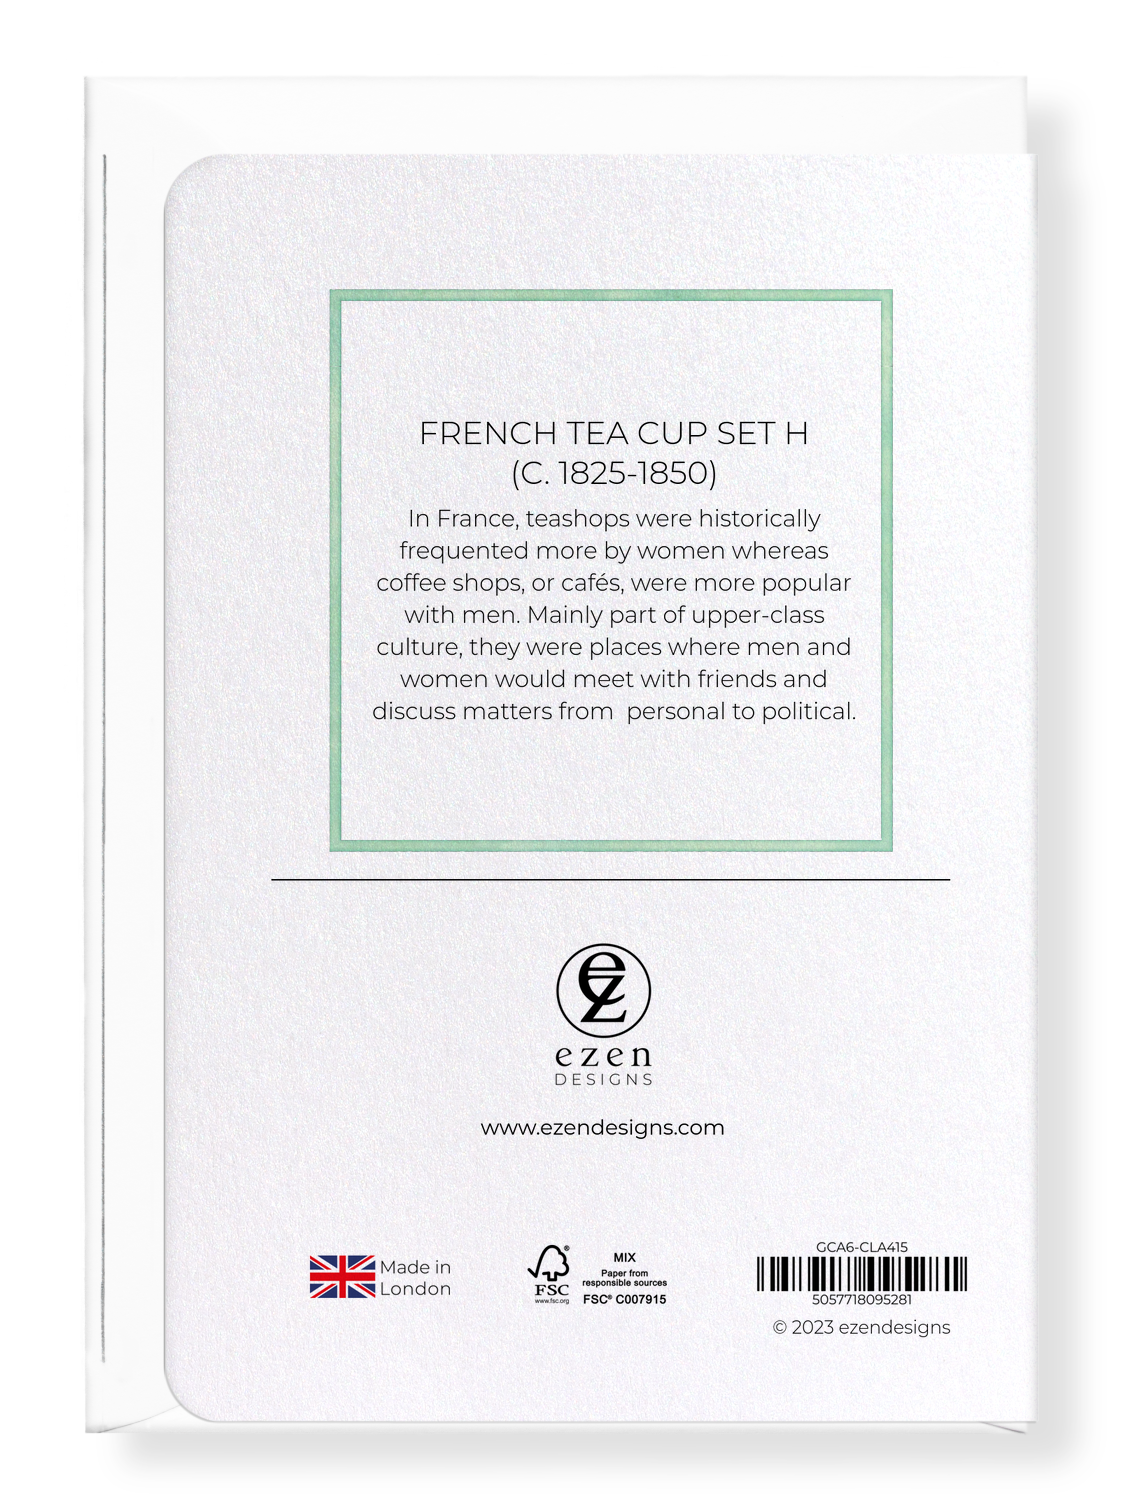 Ezen Designs - French Tea Cup Set H (c. 1825-1850) - Greeting Card - Back